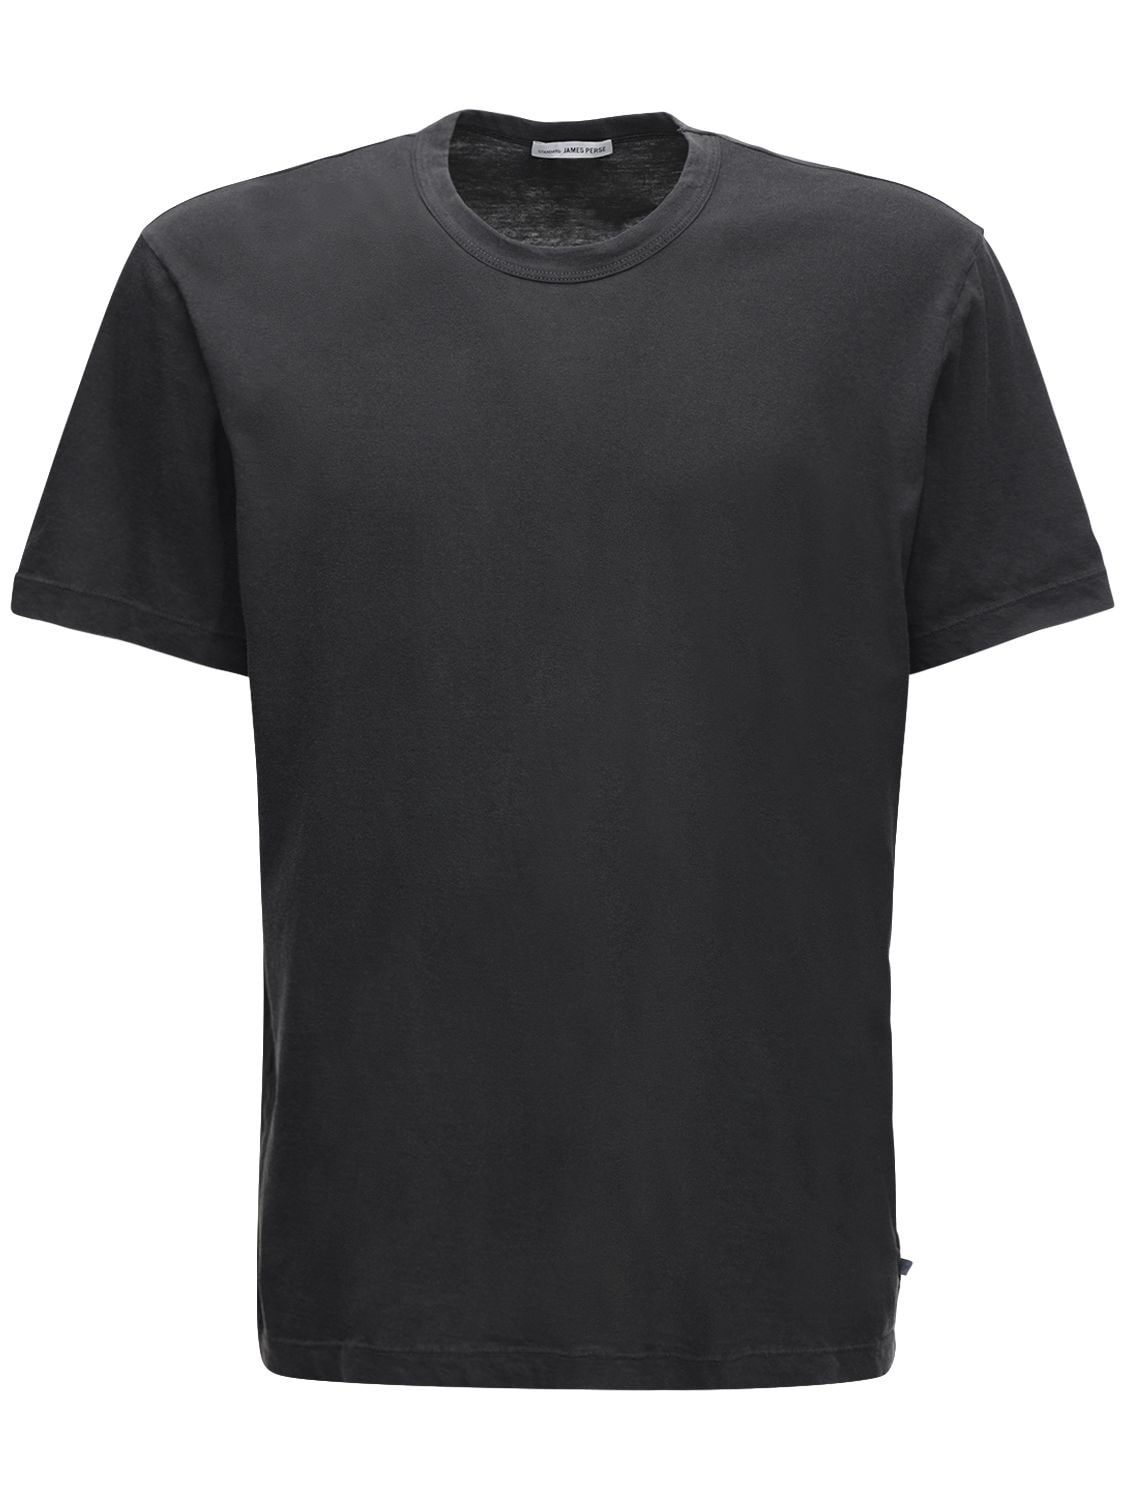 James Perse Lightweight Cotton Jersey T-shirt In Carbon